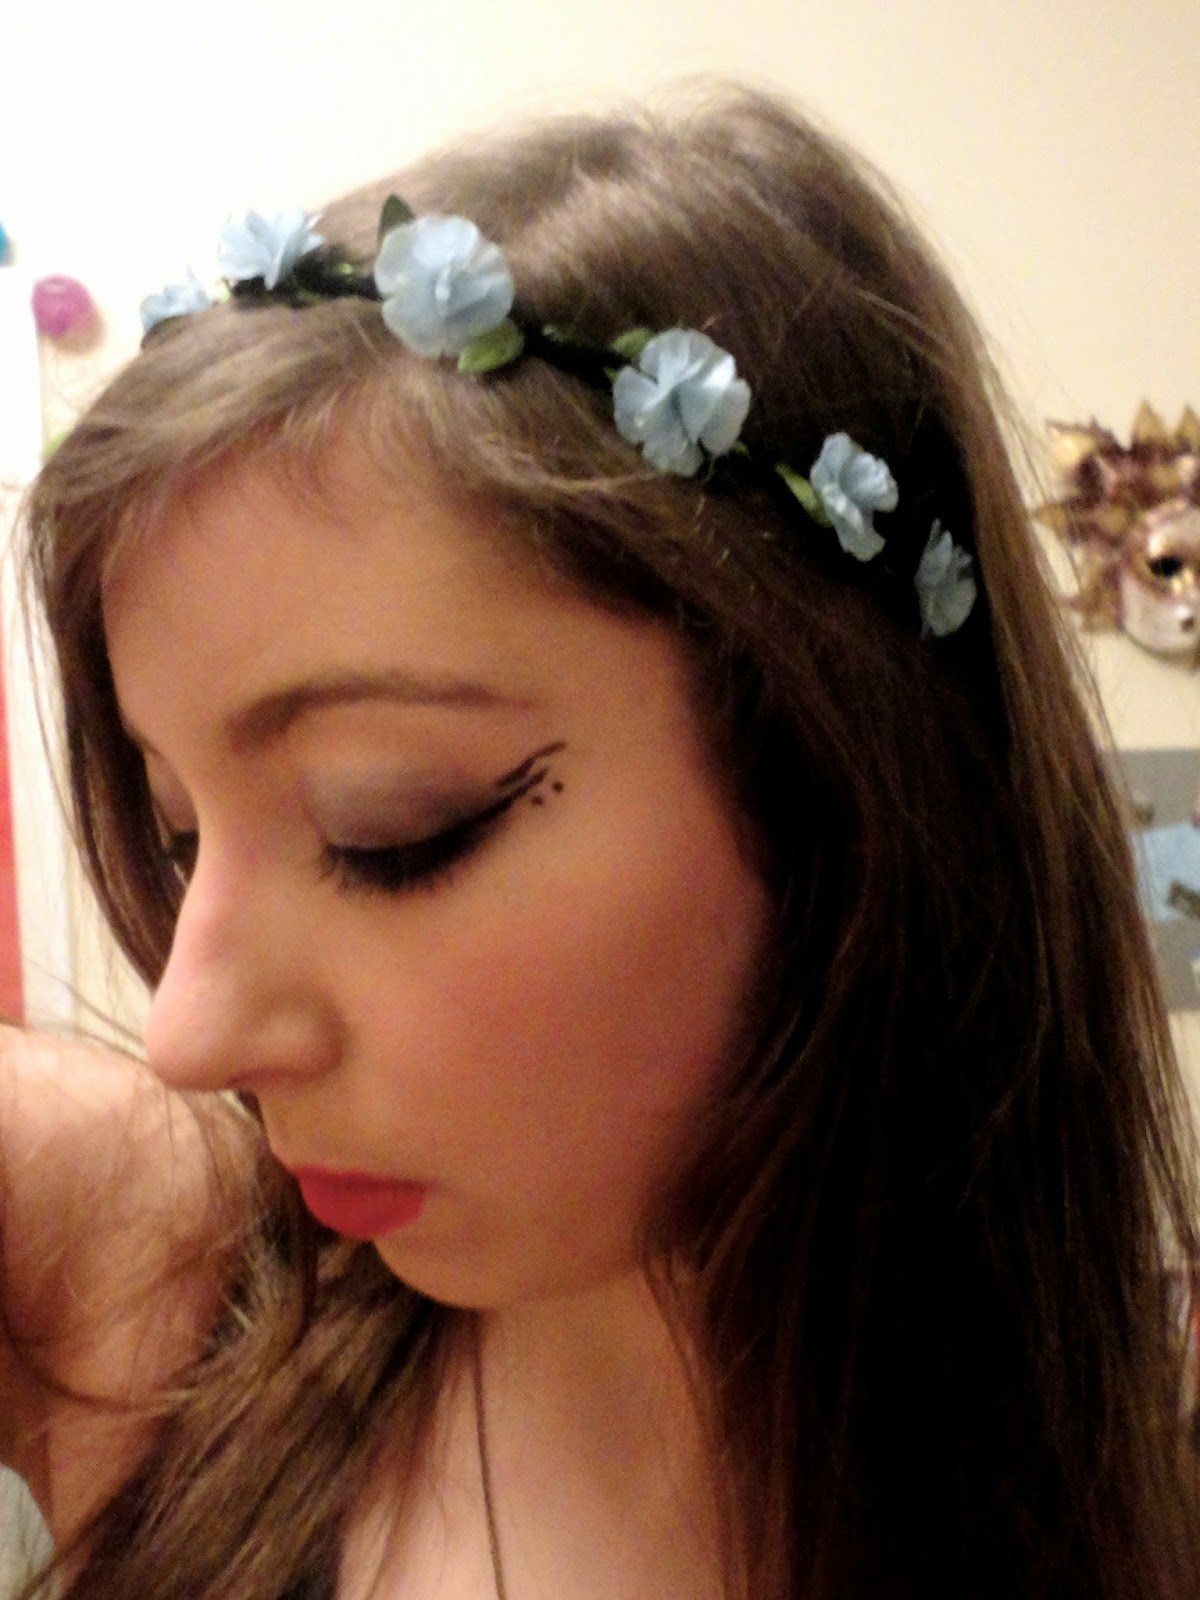 Birthday party nymph elf outfit details of blue flower crown and eye makeup